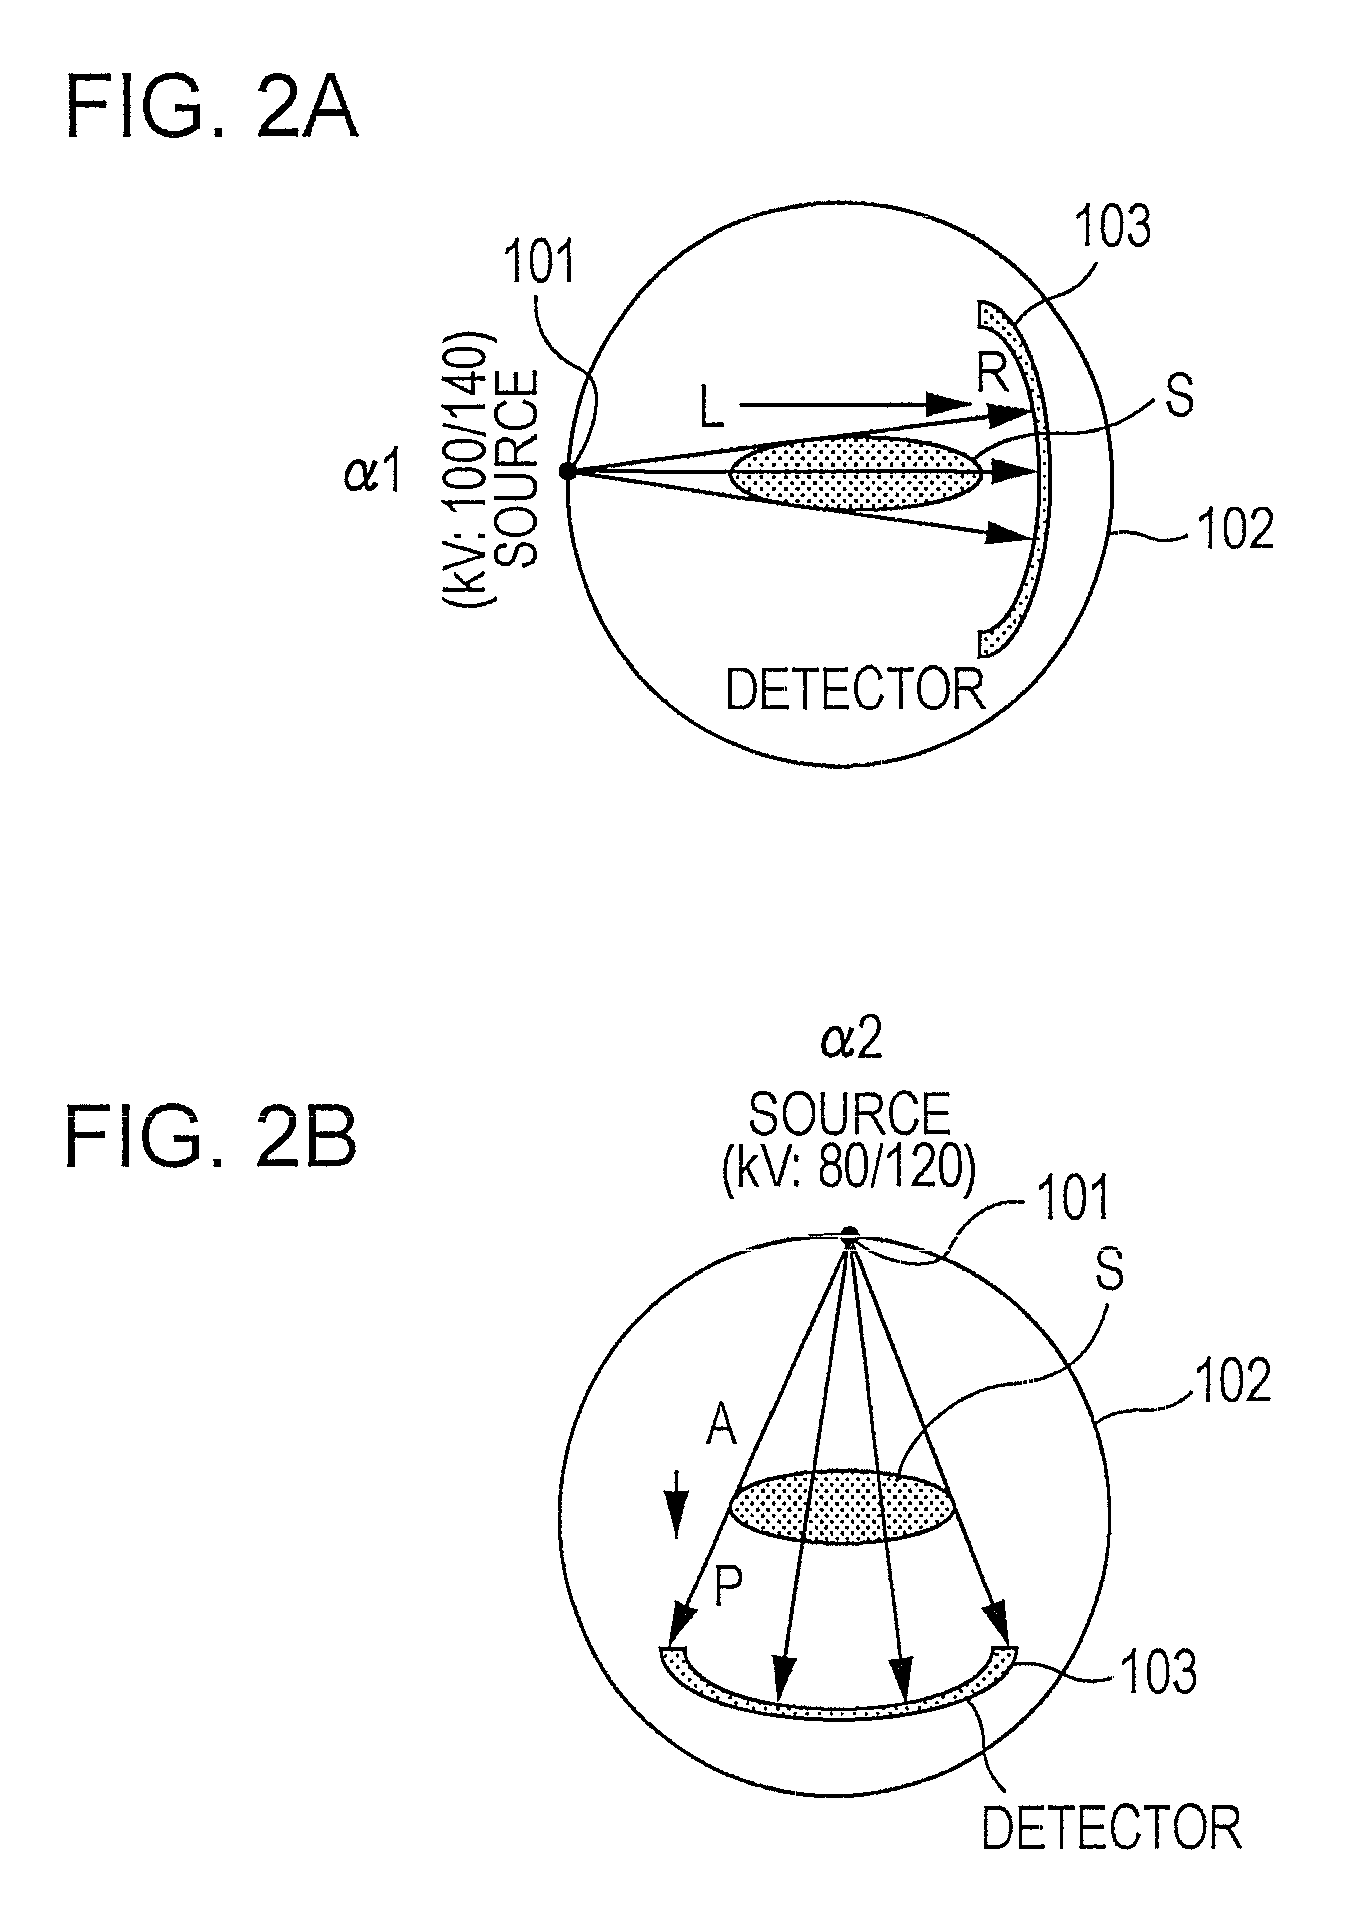 Voltage and or current modulation in dual energy computed tomography